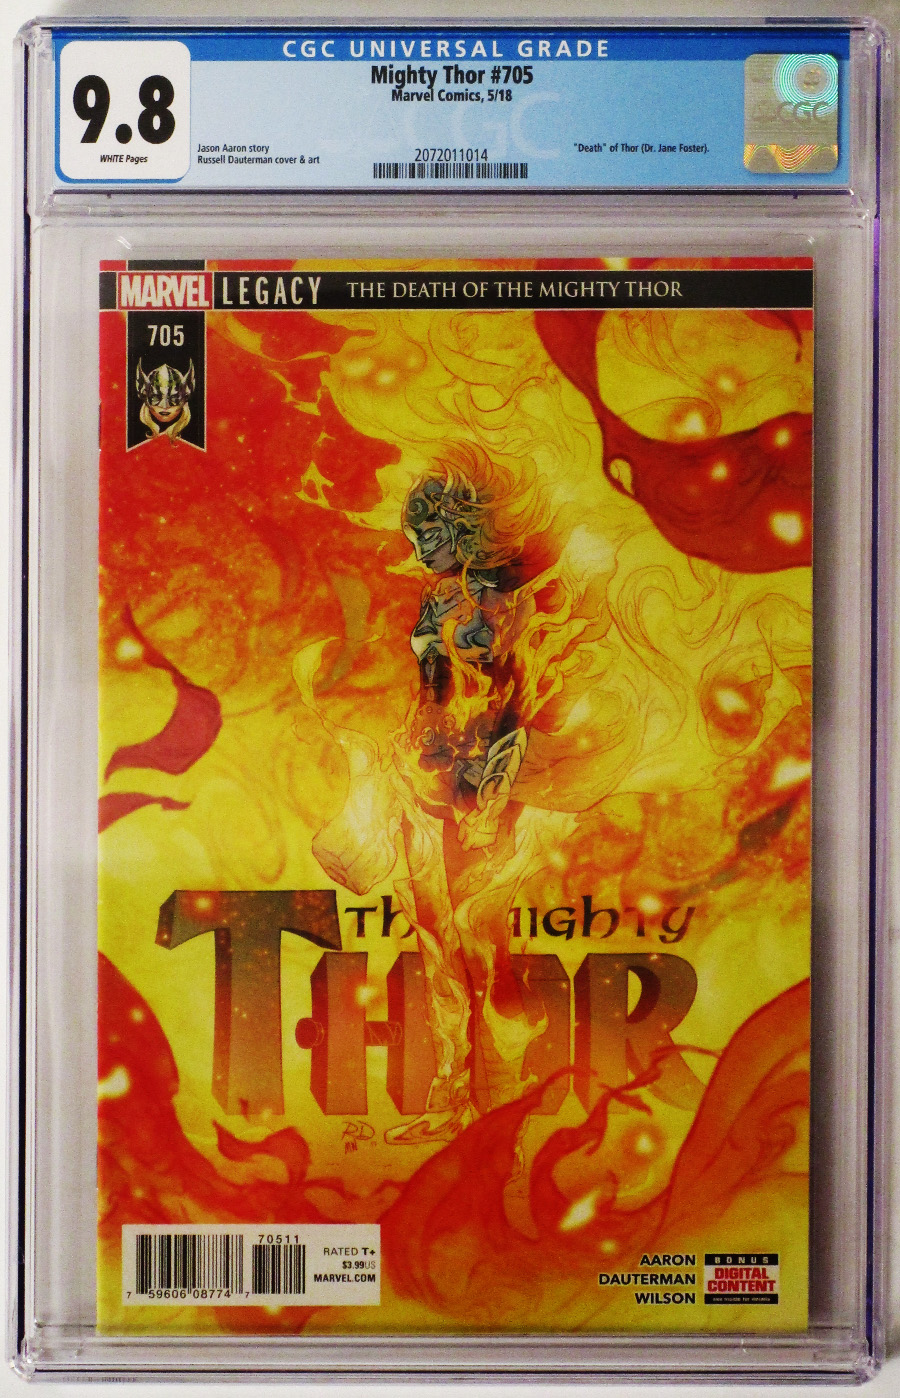 Mighty Thor Vol 2 #705 Cover F Regular Russell Dauterman Cover (Marvel Legacy Tie-In) CGC 9.8